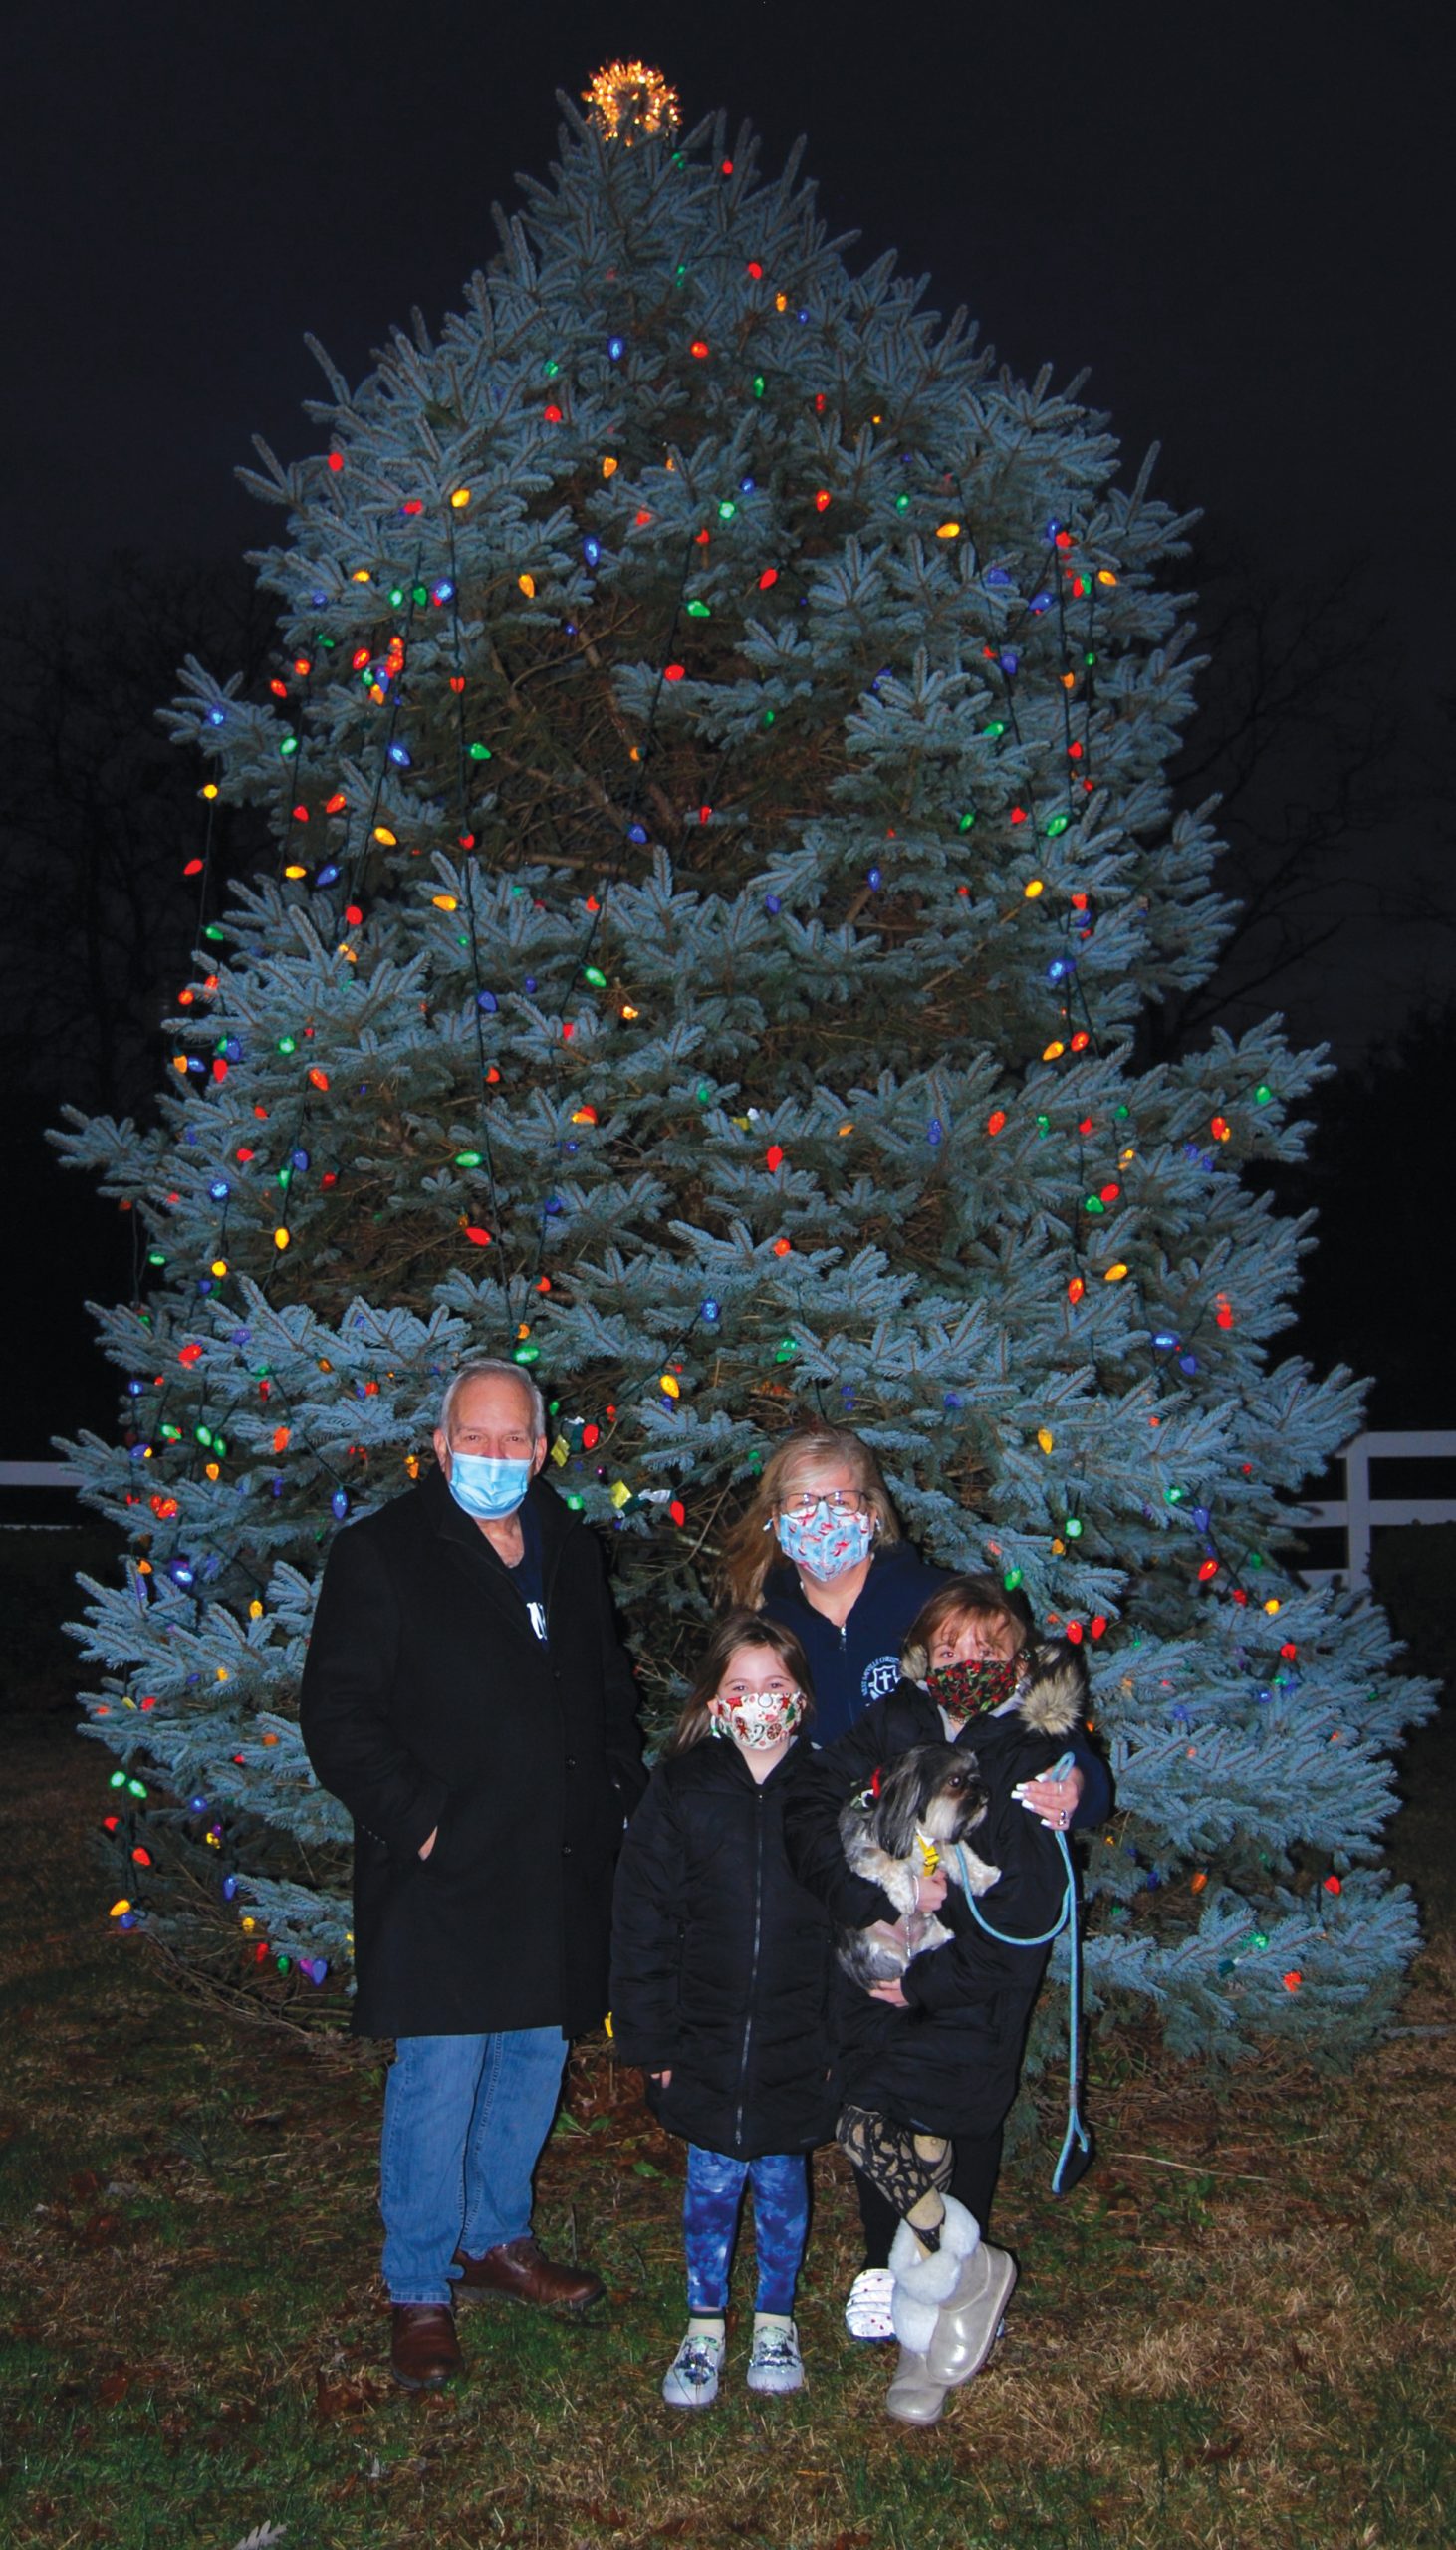 Mayor Dorman (left) poses in front of the Christmas tree with Donna Delvalle, her granddaughters Donnabella Delvalle and Madison Delvalle and their dog Toby during the village’s drive-through Christmas tree lighting.